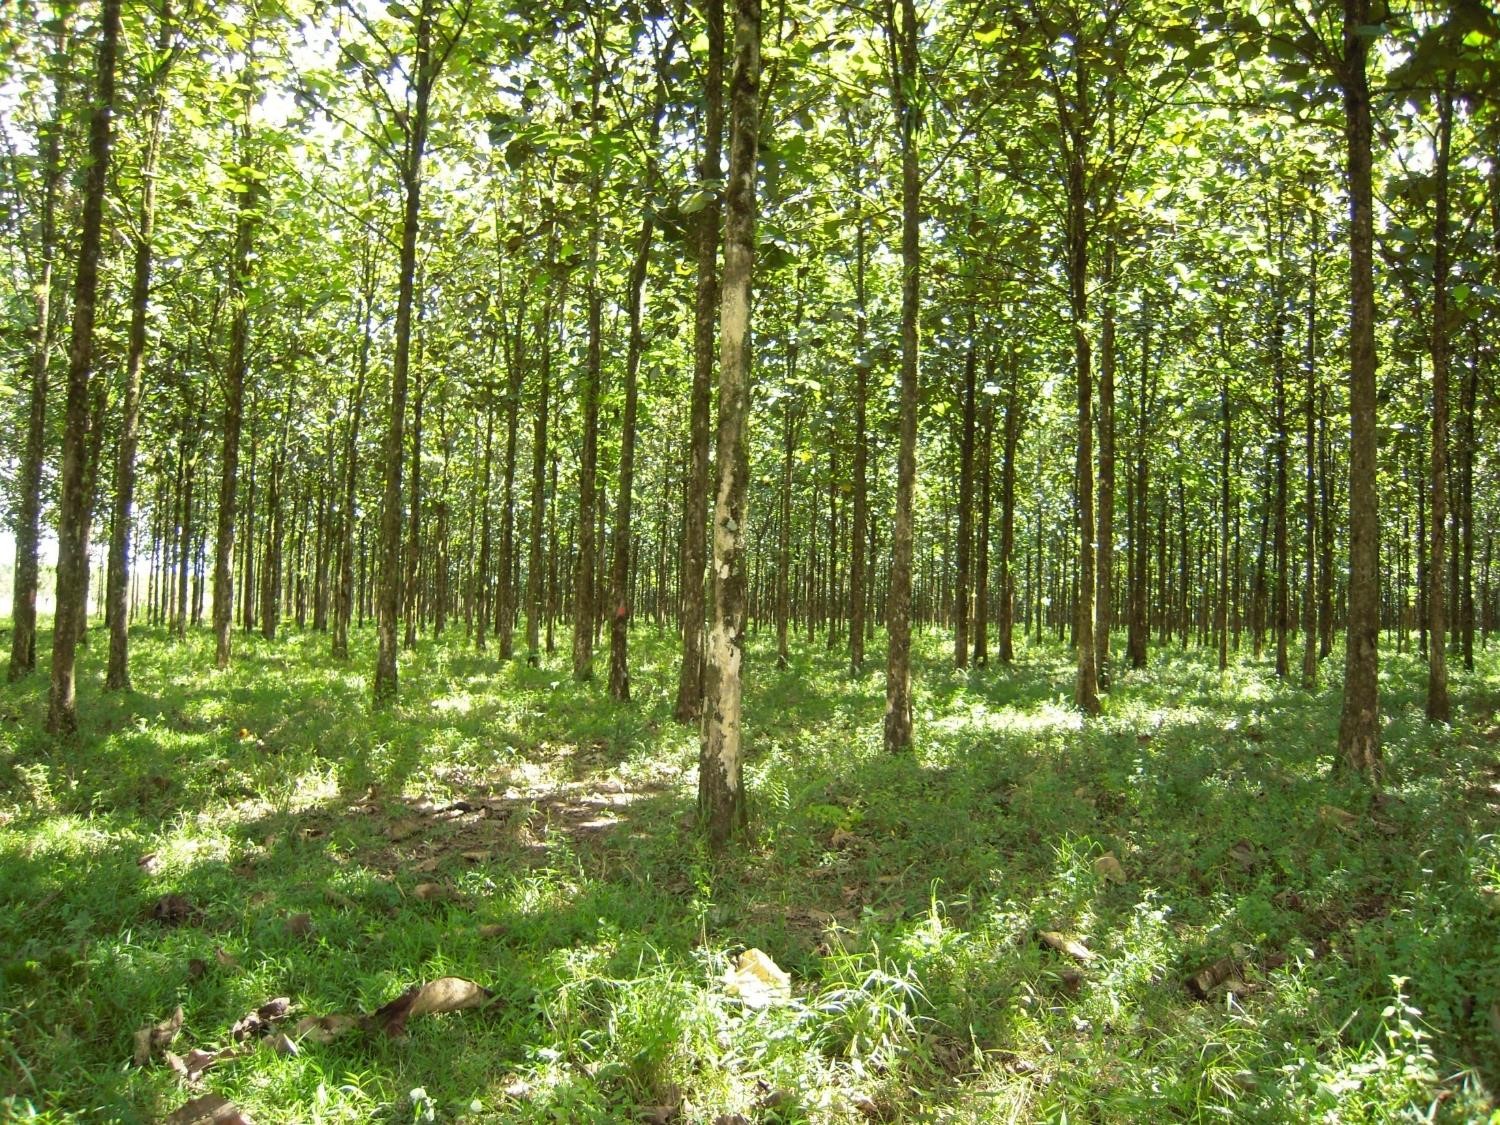 young trees planted in rows shade the forest floor